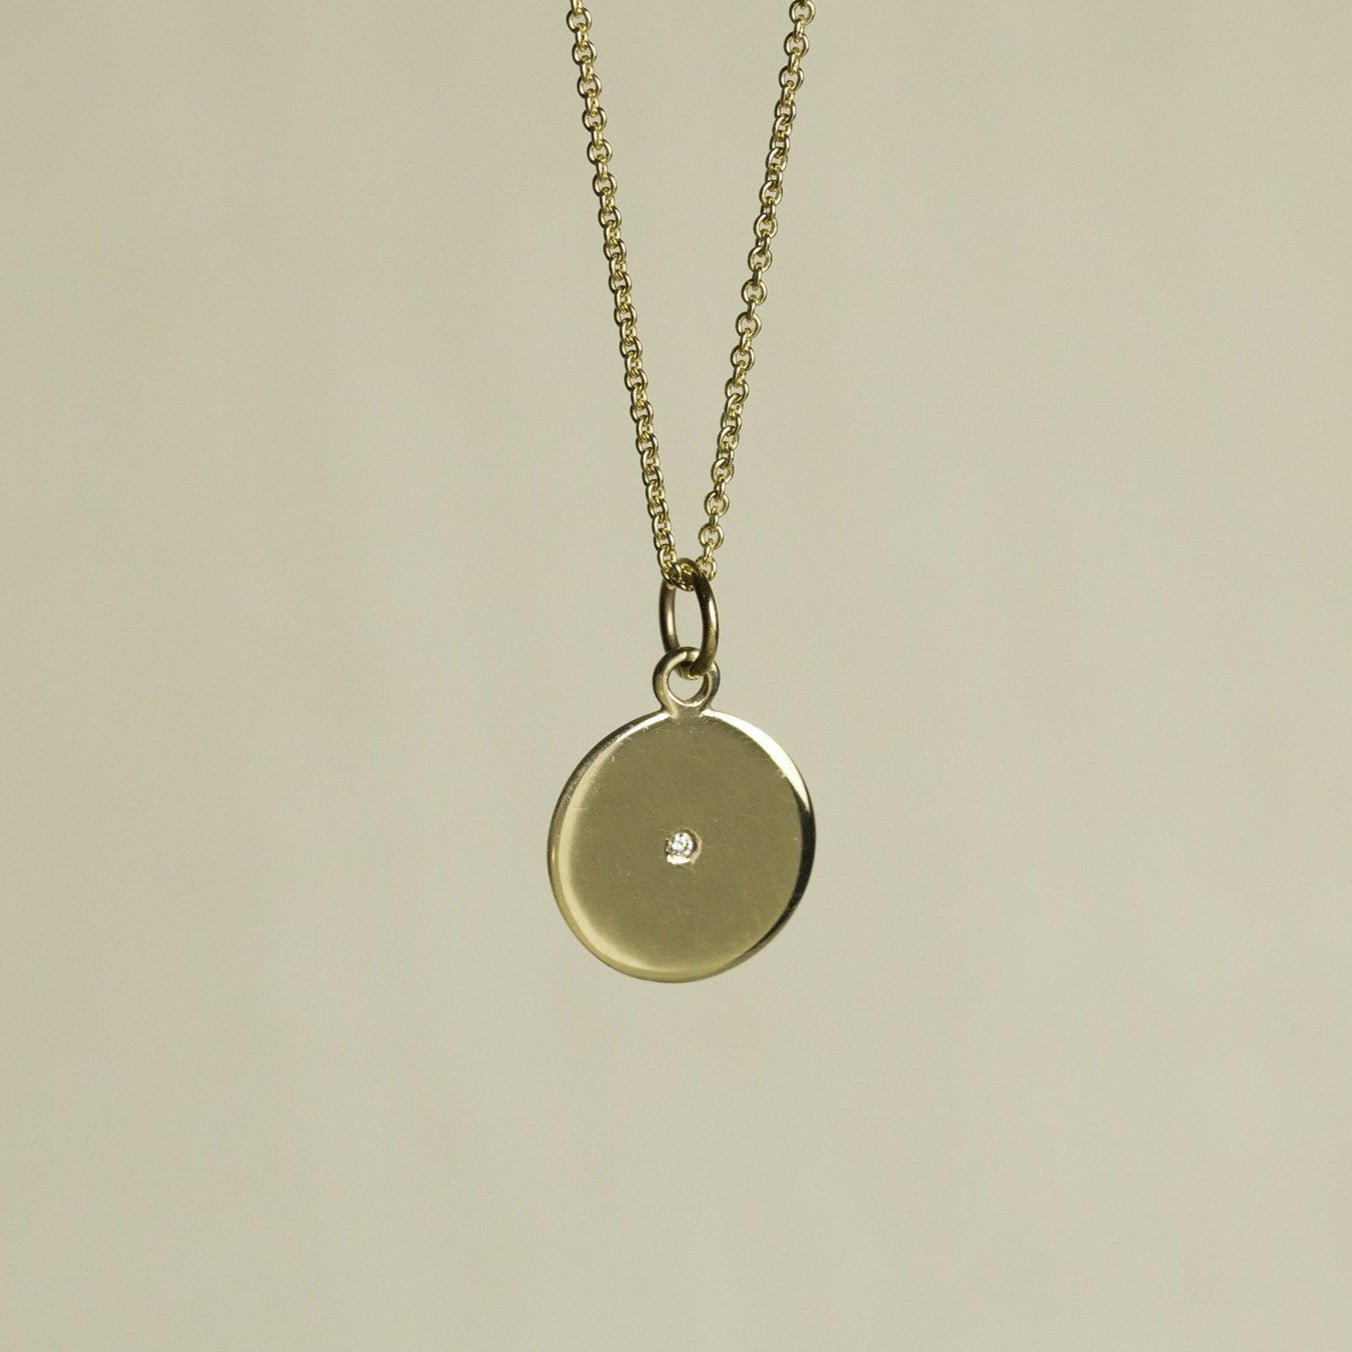 felt's own design - incredibly simple and enchanting polished gold disc with diamond on 9 carat gold chain